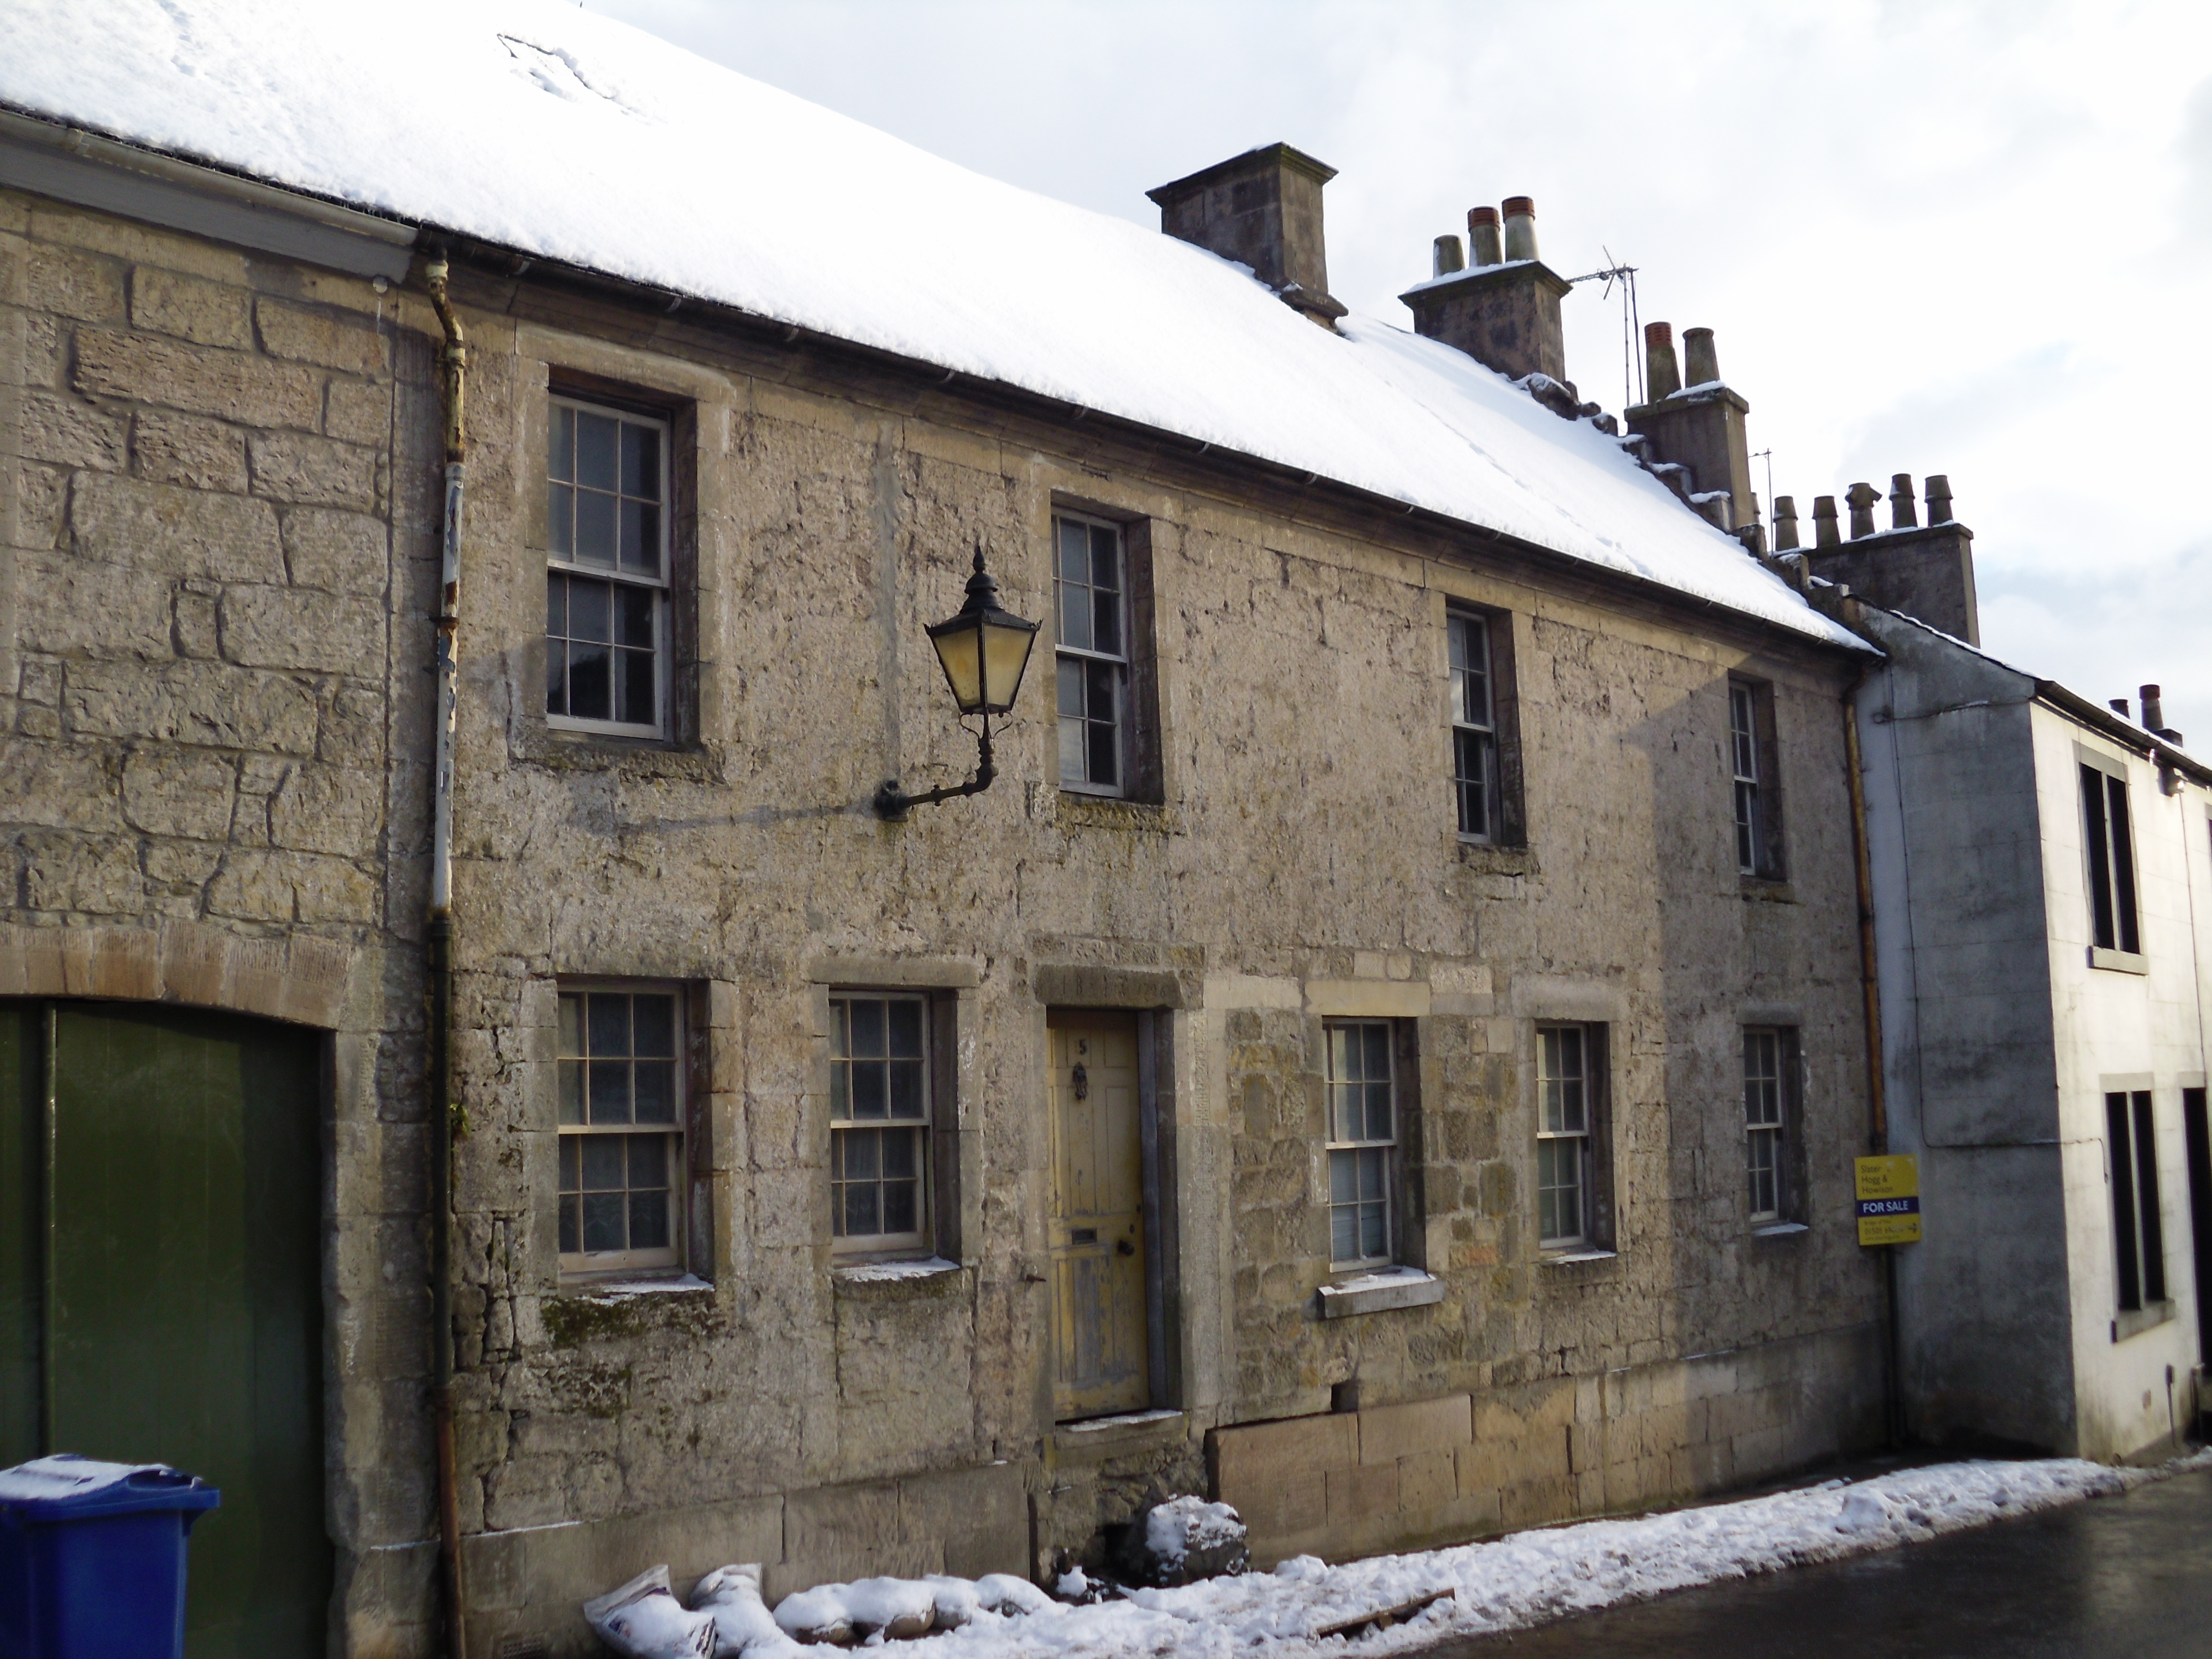 A step back in time, Kilbarchan, Renfrewshire. - panoramio